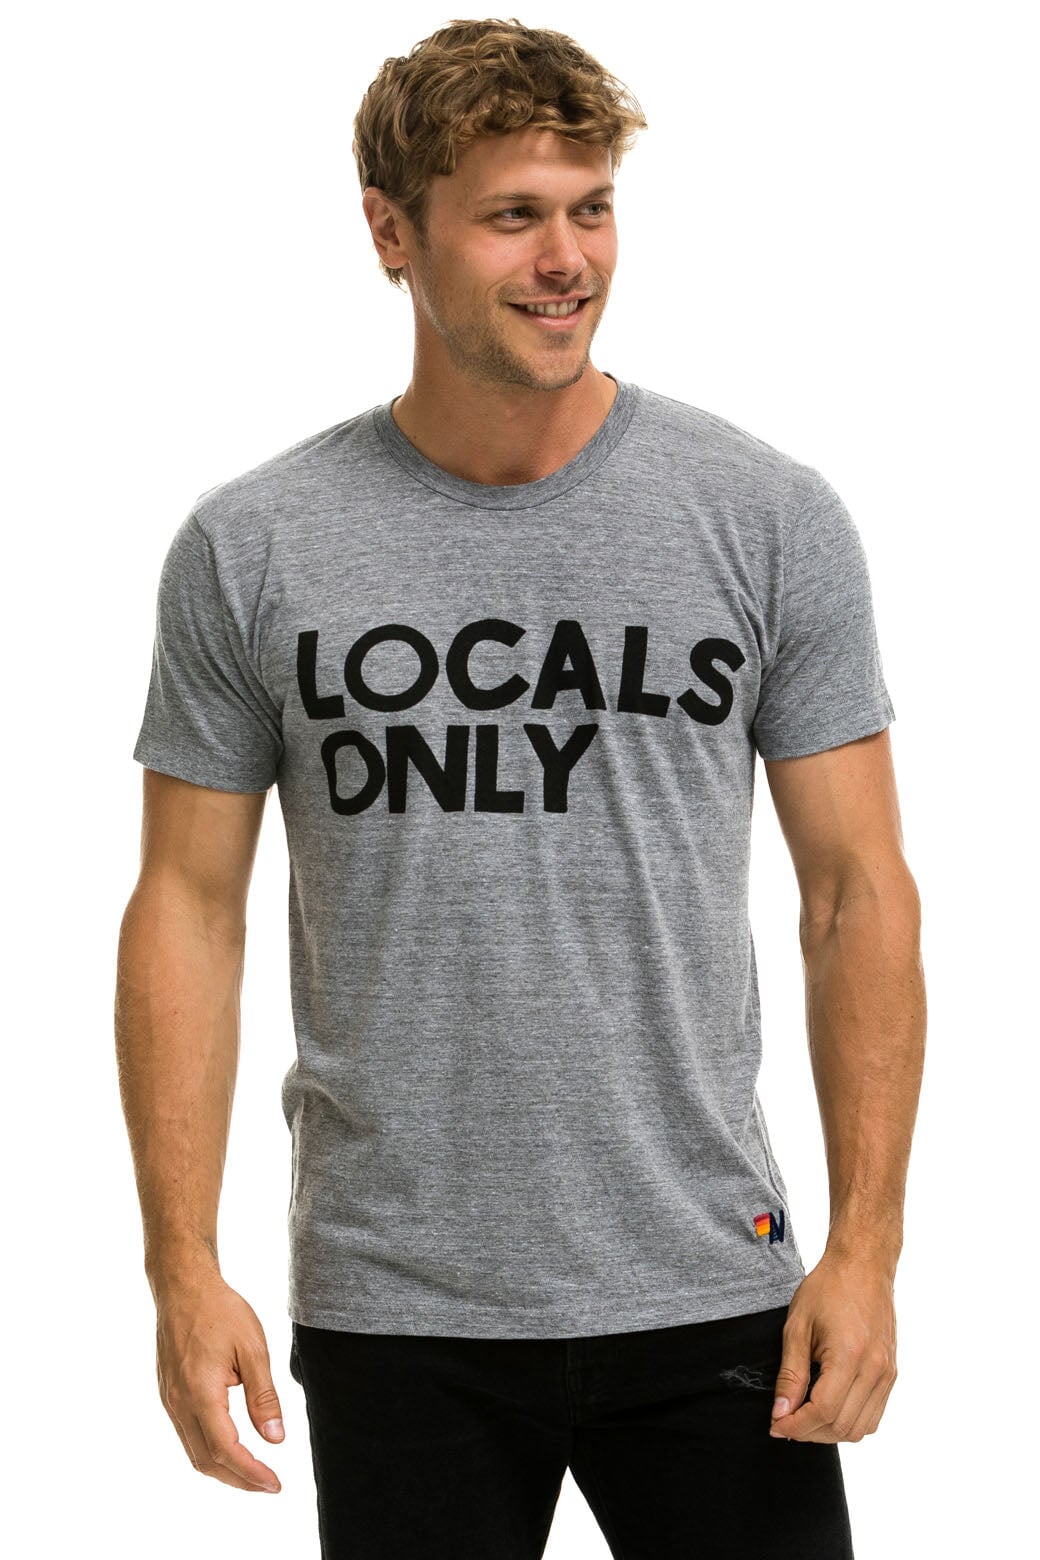 LOCALS ONLY TEE - HEATHER GREY Tees Aviator Nation 